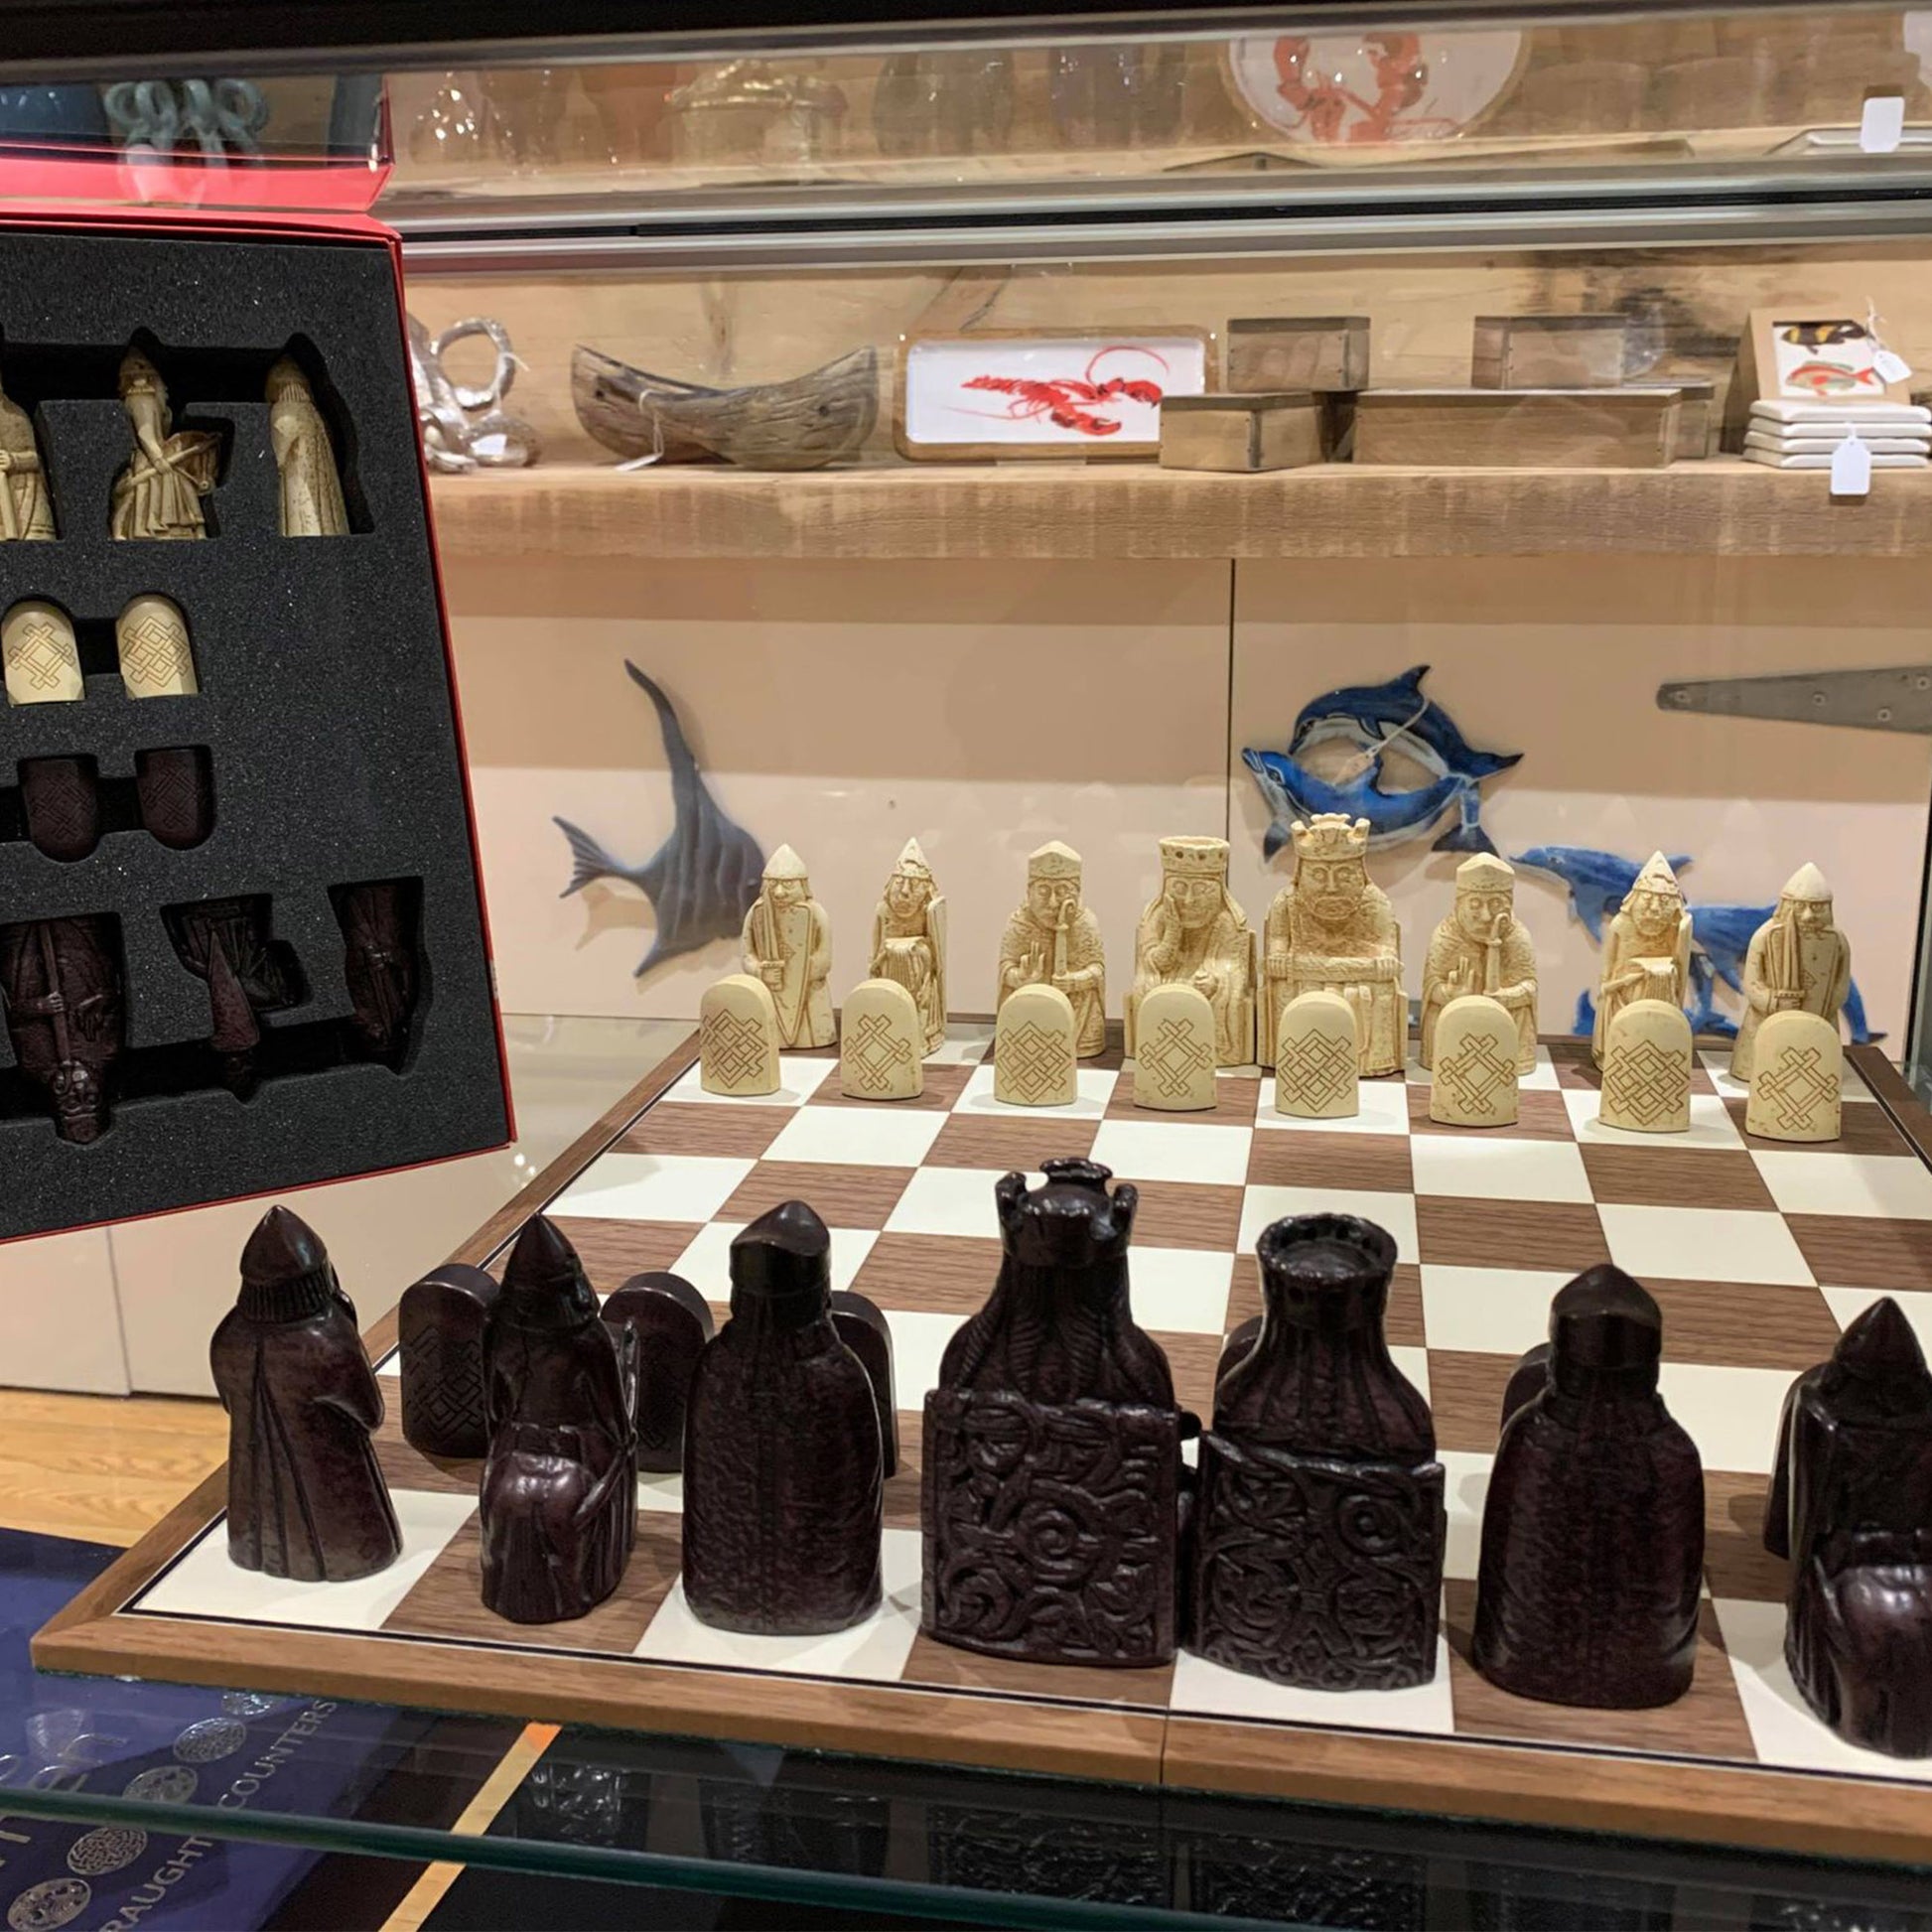 The Lewis Chessmen: Historical Chess Set Reproduction (Midsized) Close-up in a Display Case|  Happy Piranha